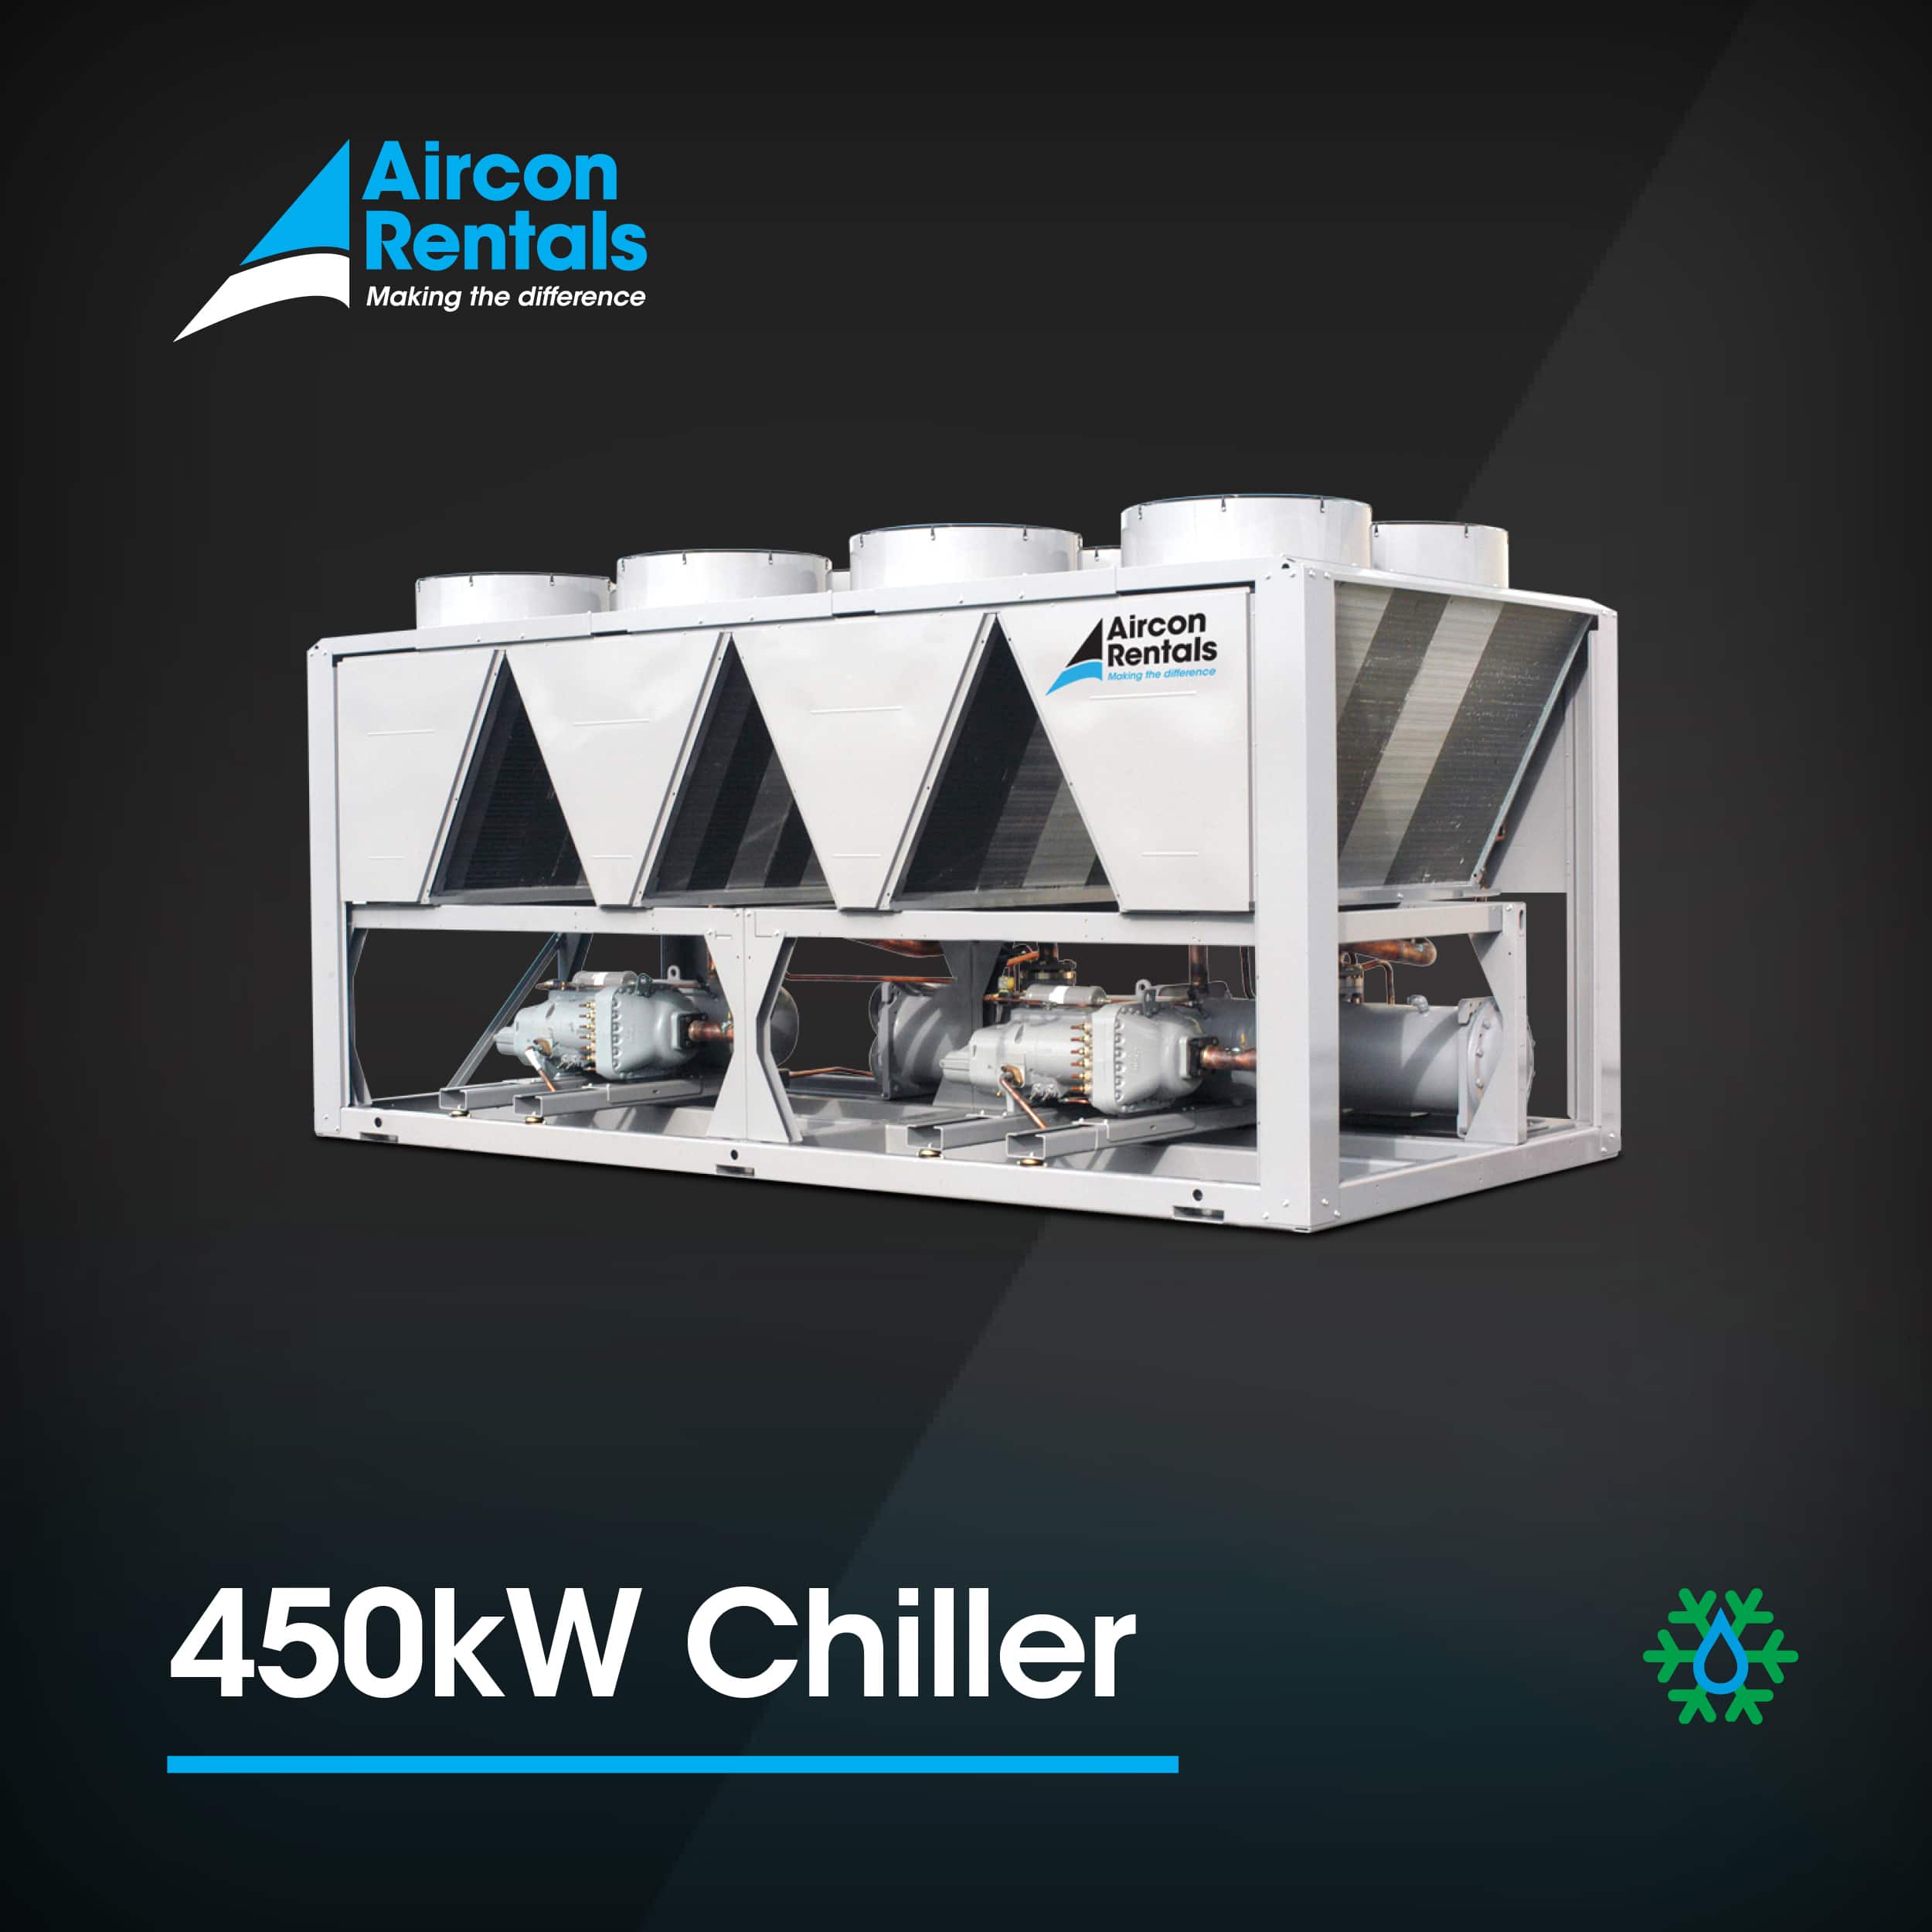 450kW Air Cooled Chiller | Aircon Rentals